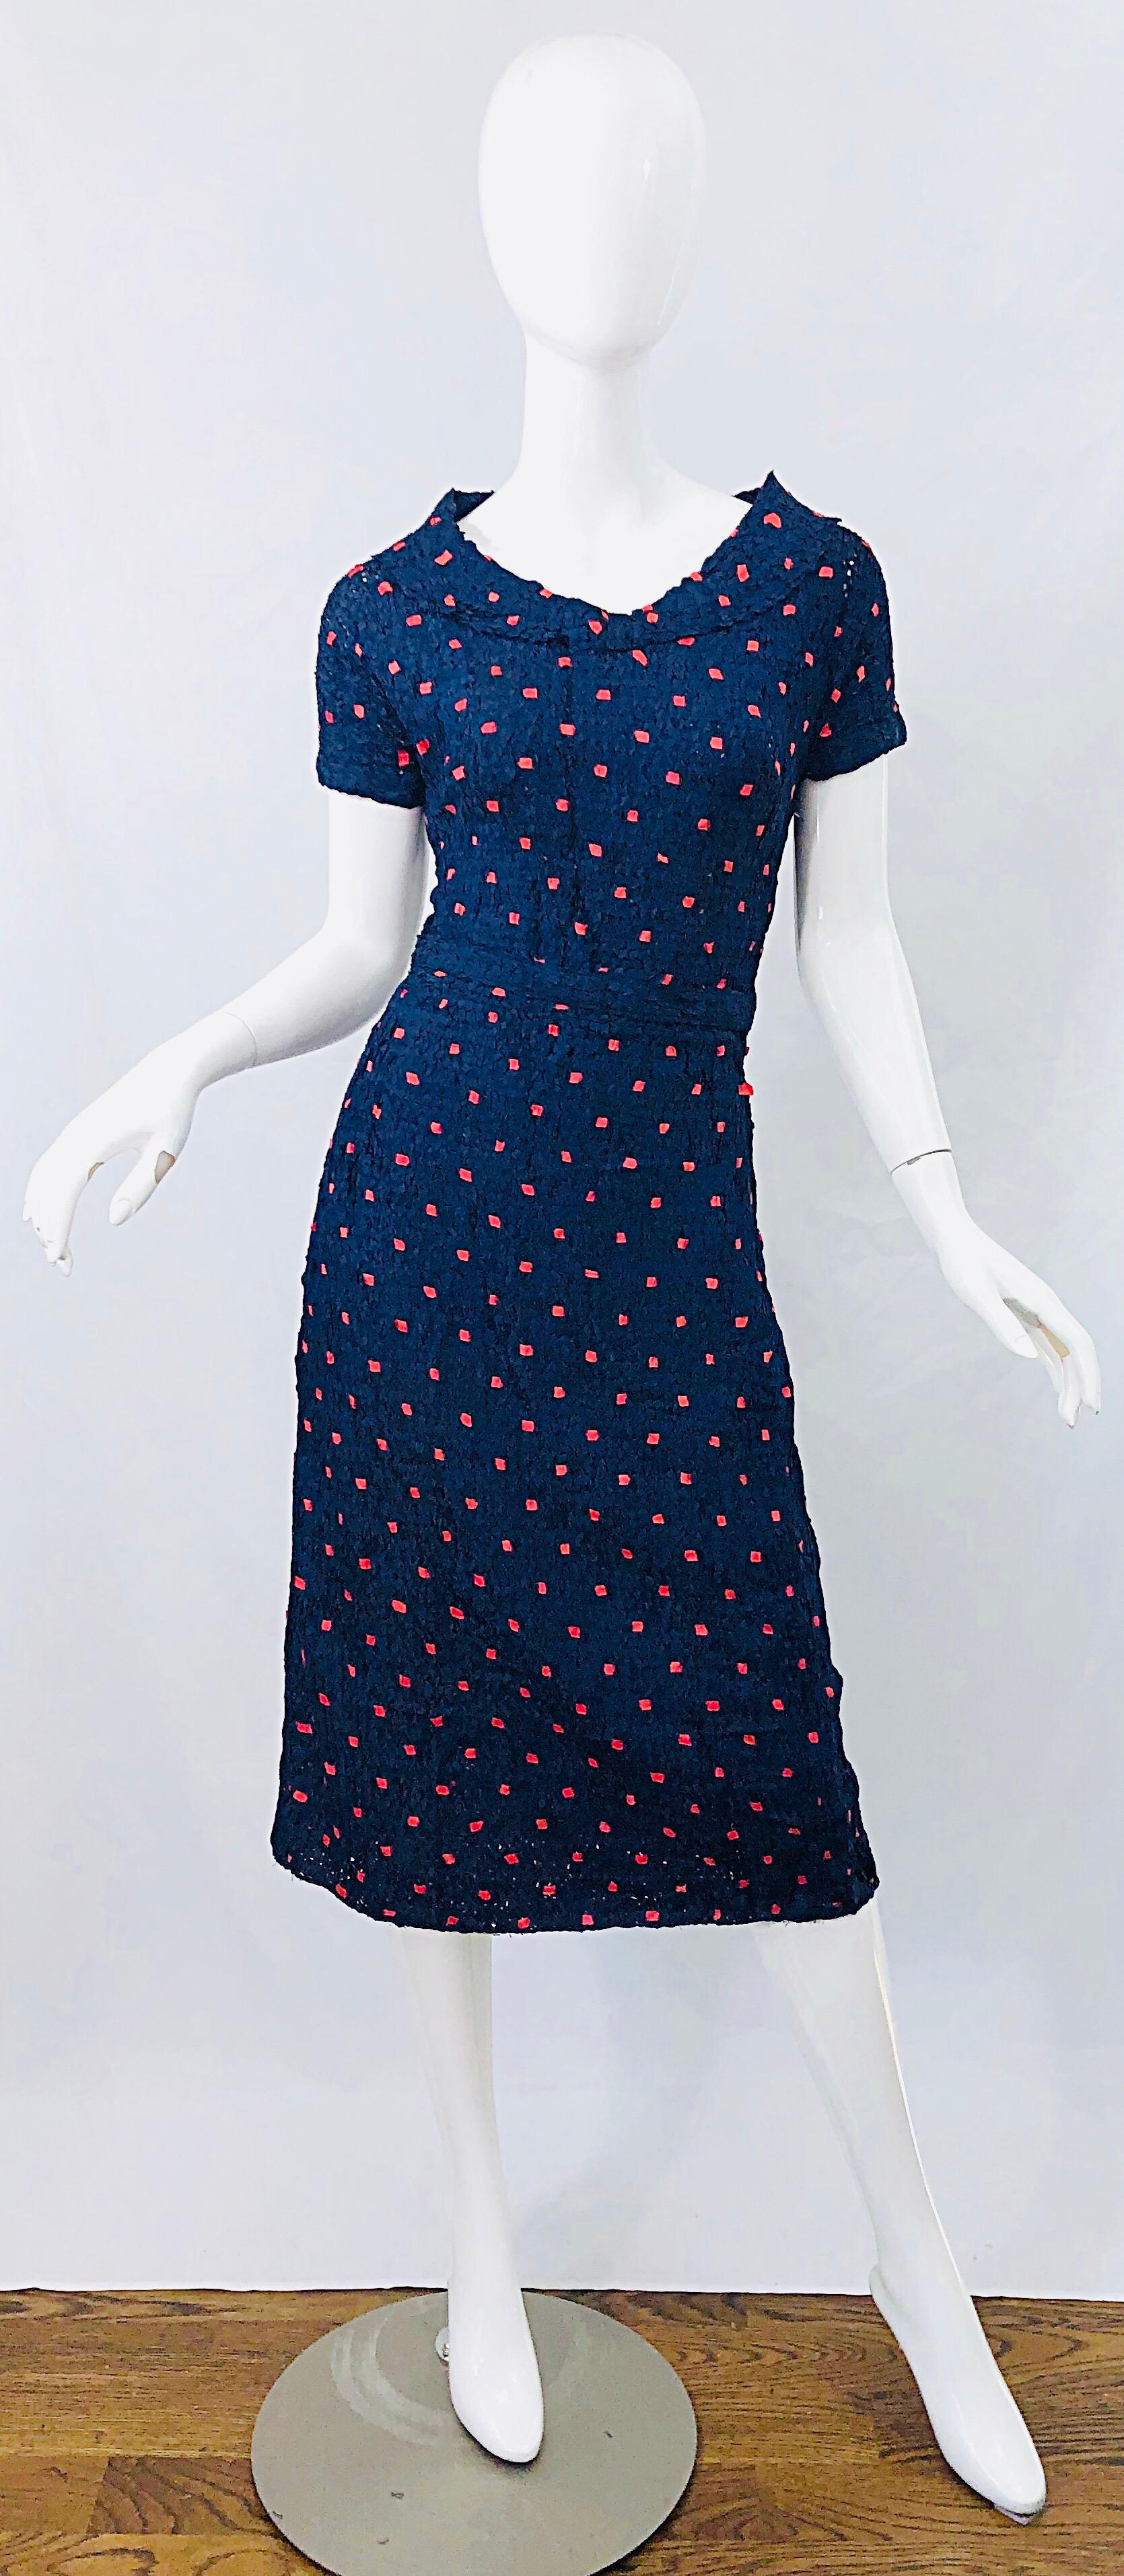 Rare ANN FLEISCHER for I. MAGNIN early 1950s navy blue and red hand knit ribbon silk belted dress ! Couture quality with the entire dress literally hand woven with silk ribbons. Chic collar with a tailored bodice. Hidden metal zipper up the side